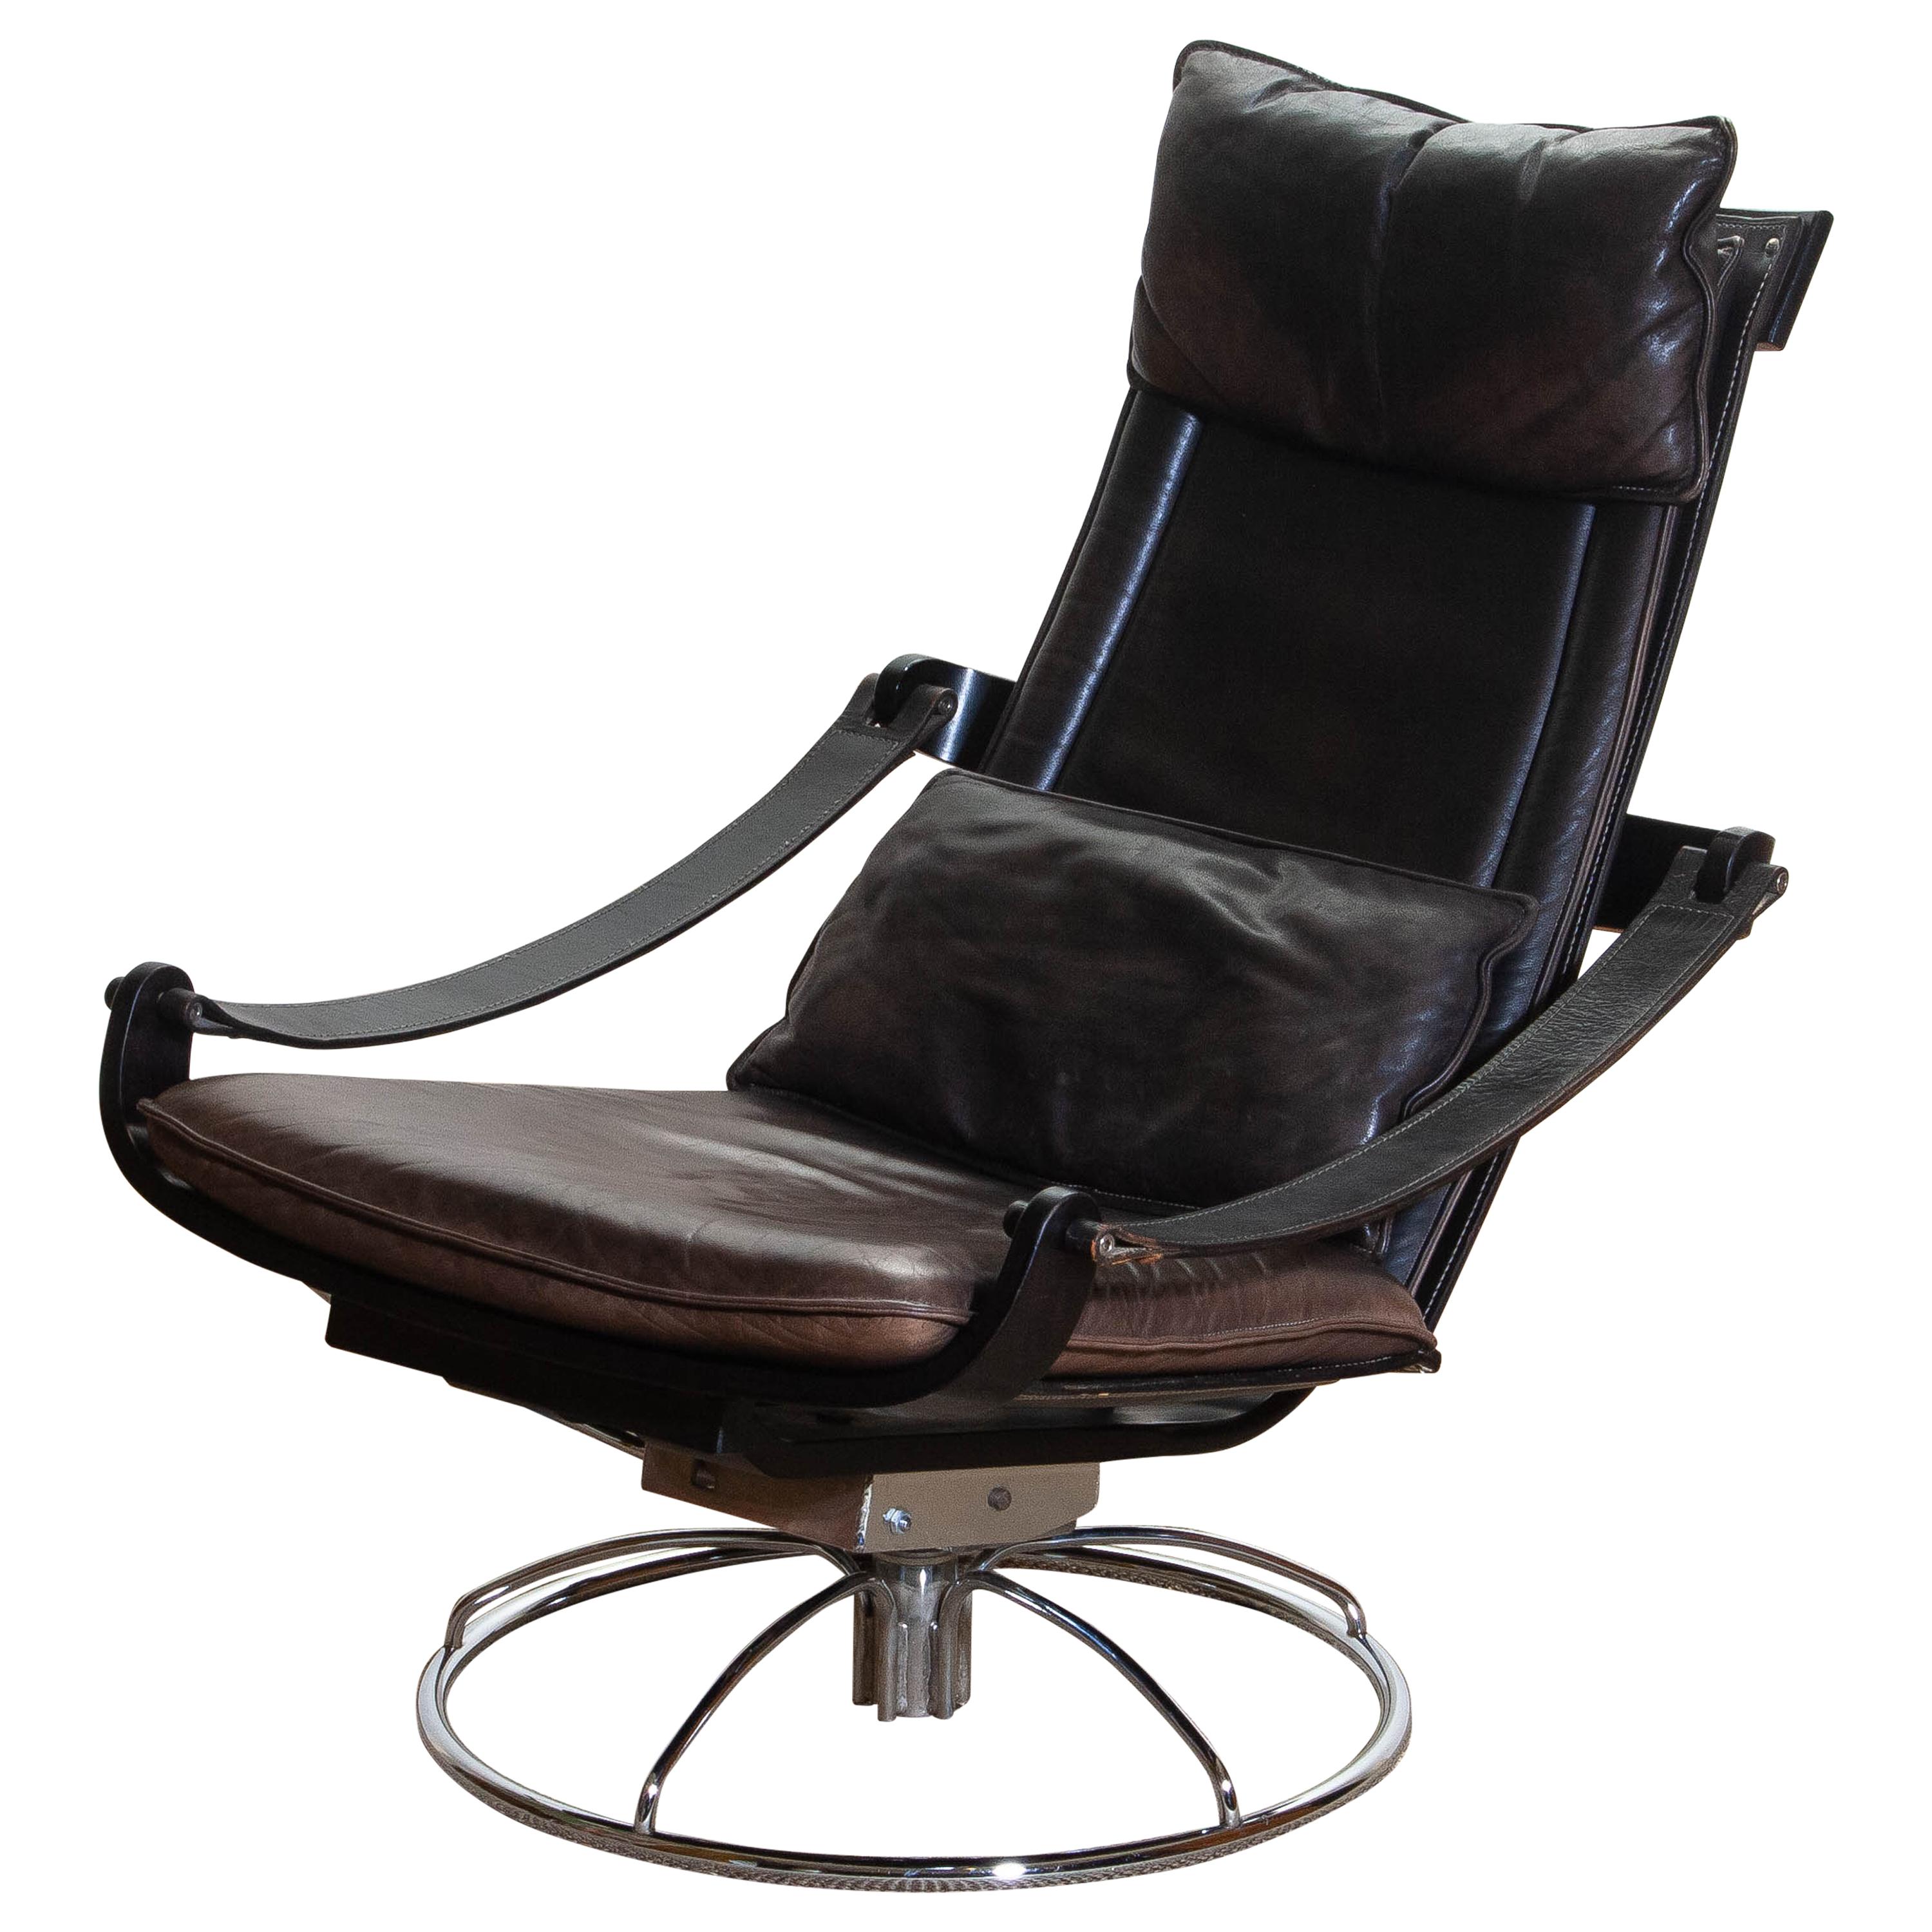 1970s Artistic Leather Swivel / Relax Chair by Ake Fribytter for Nelo, Sweden 9